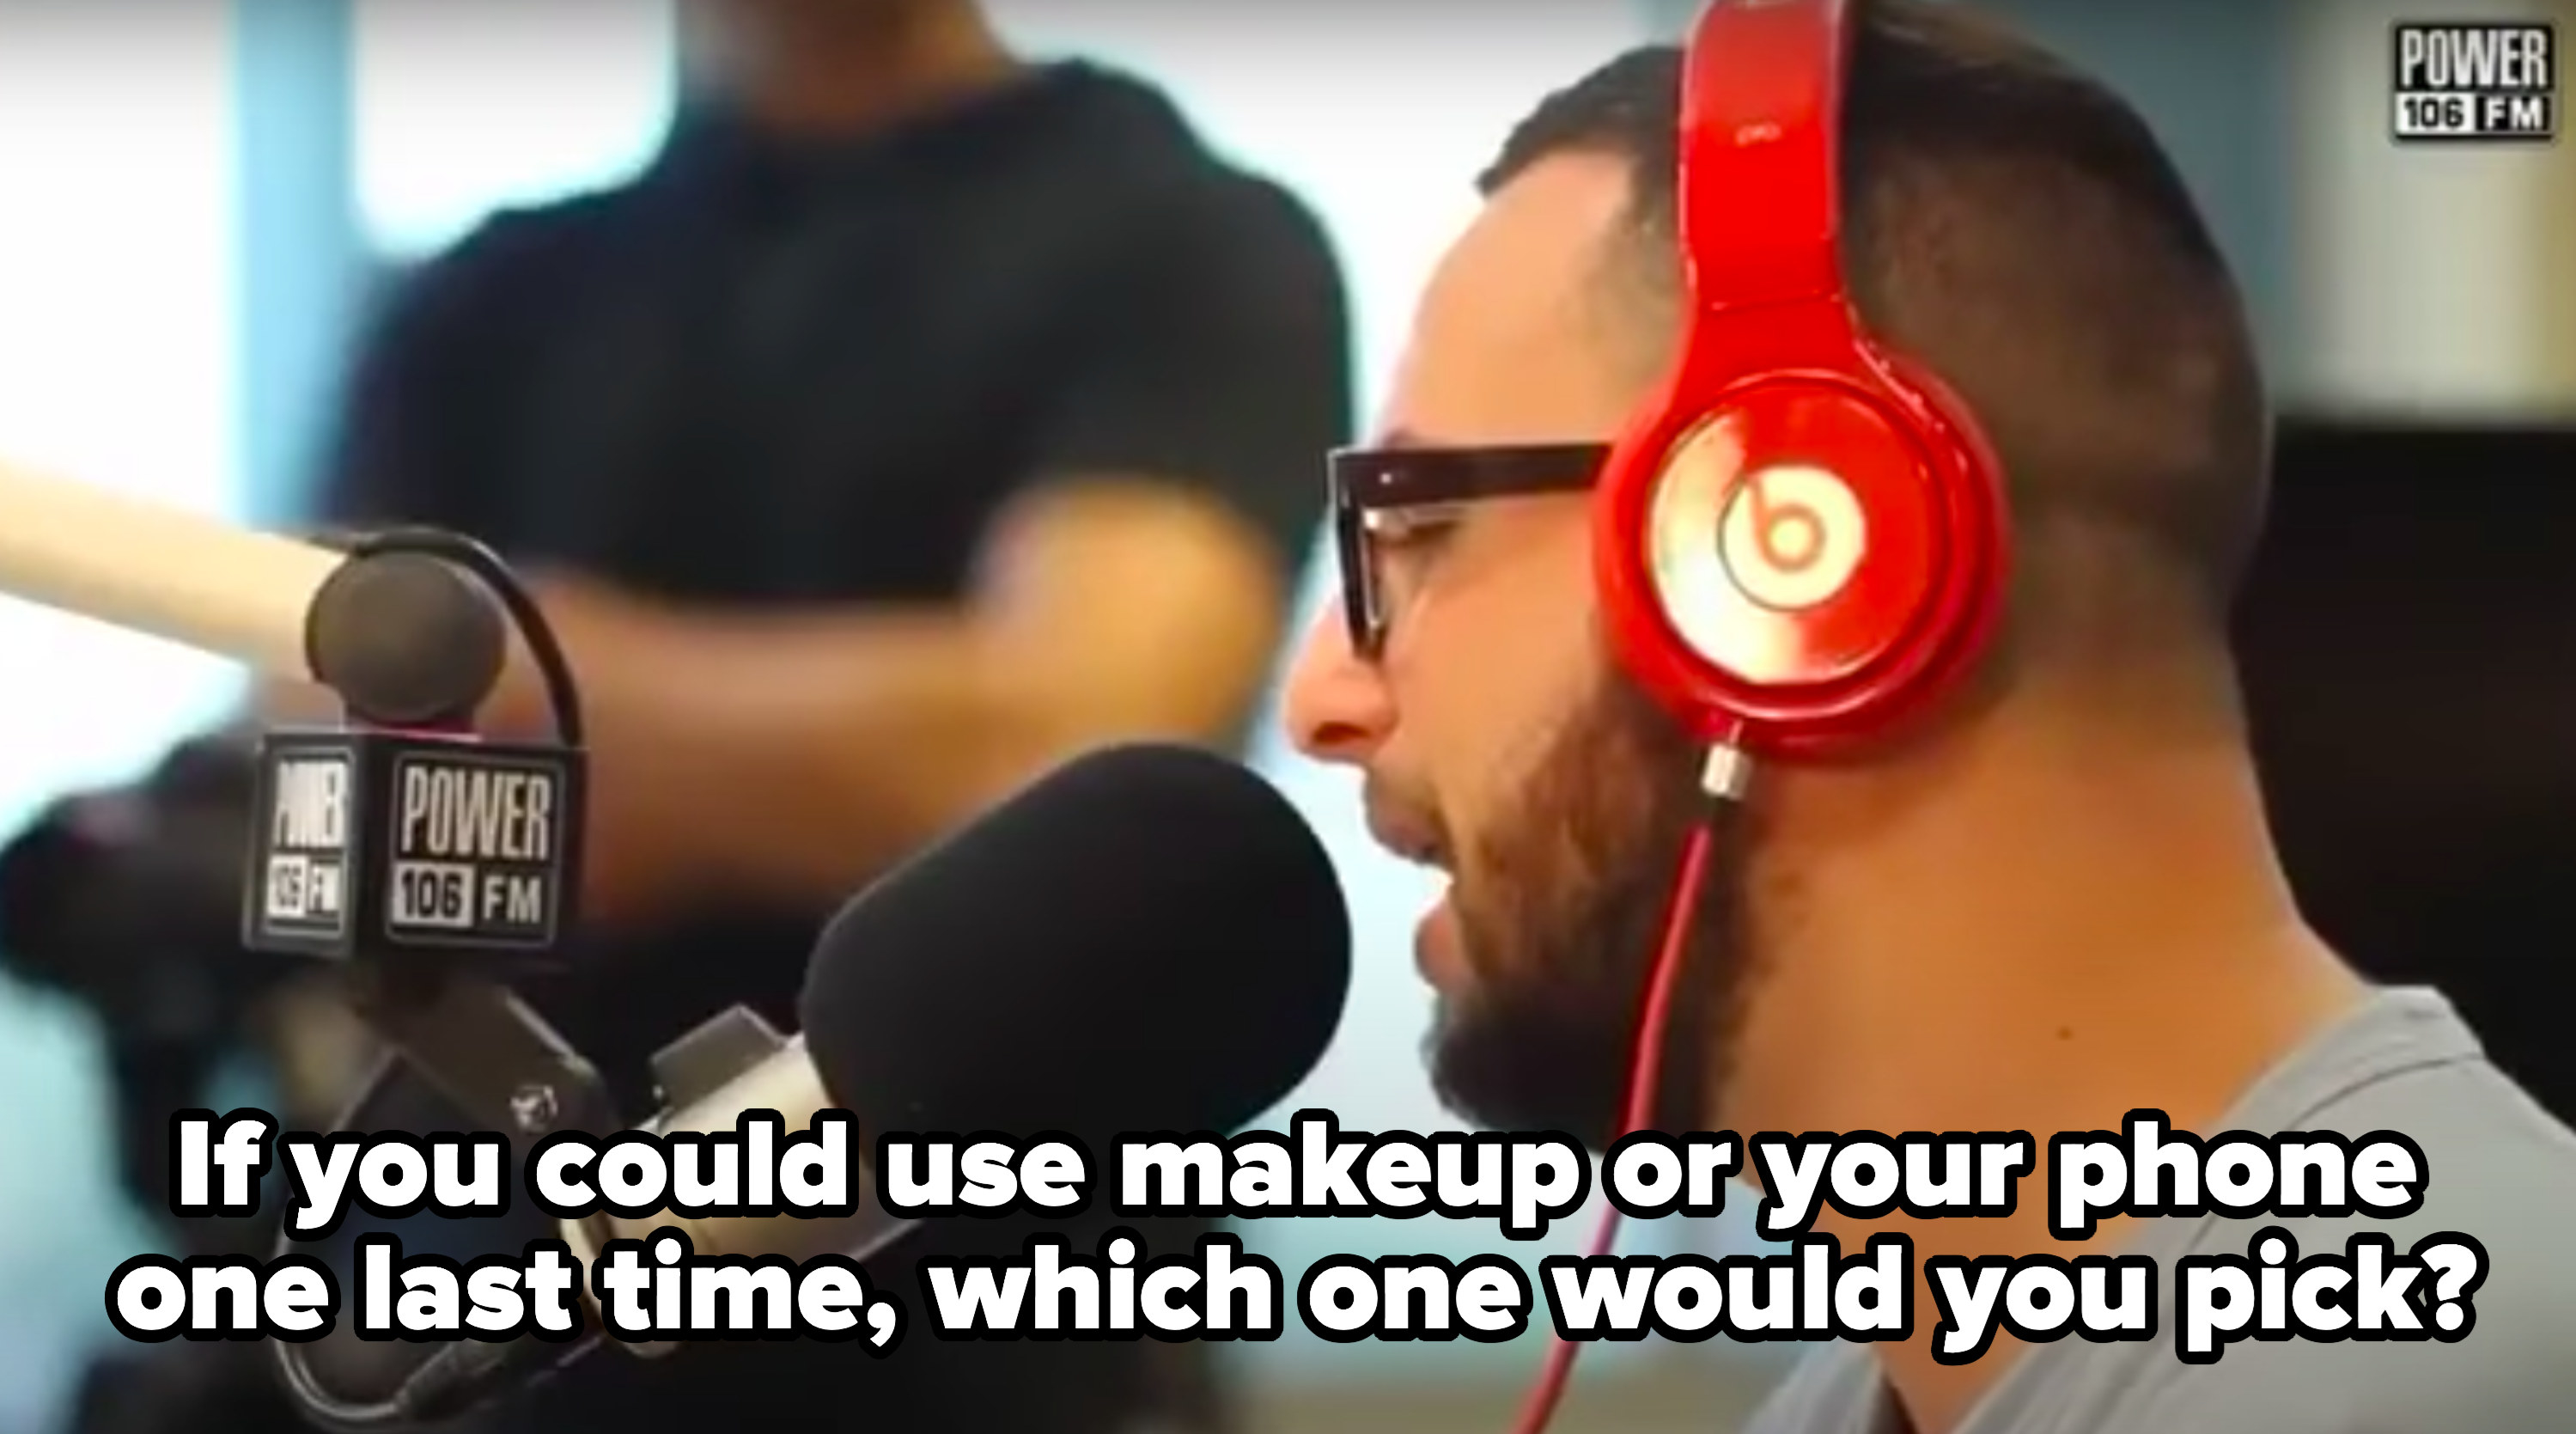 The host asks Ariana &quot;If you could use makeup or your phone one last time, which one would you pick?&quot;